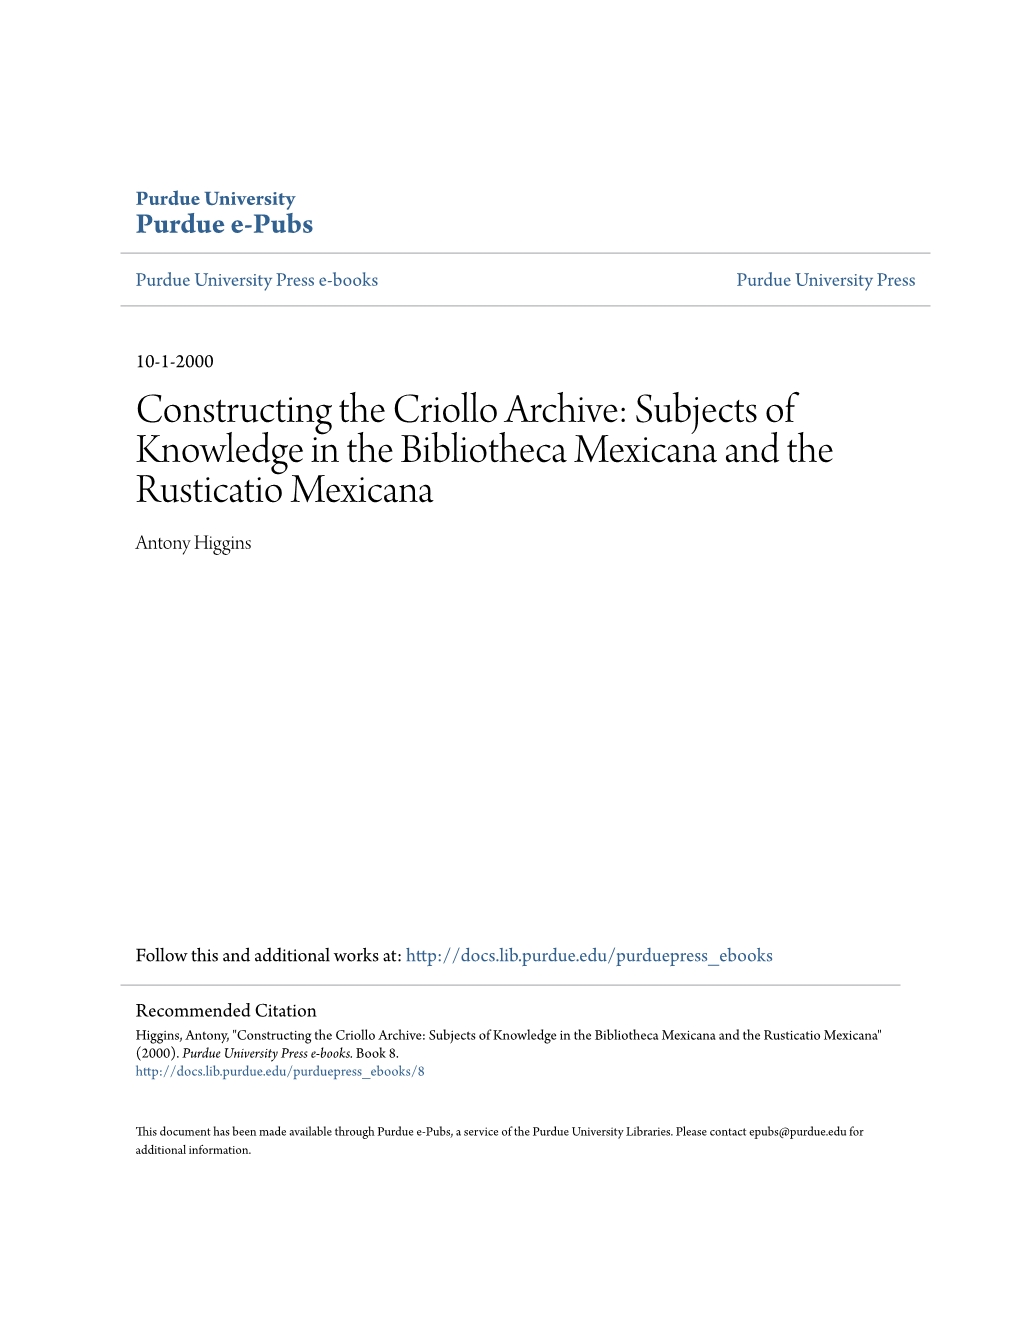 Constructing the Criollo Archive: Subjects of Knowledge in the Bibliotheca Mexicana and the Rusticatio Mexicana Antony Higgins